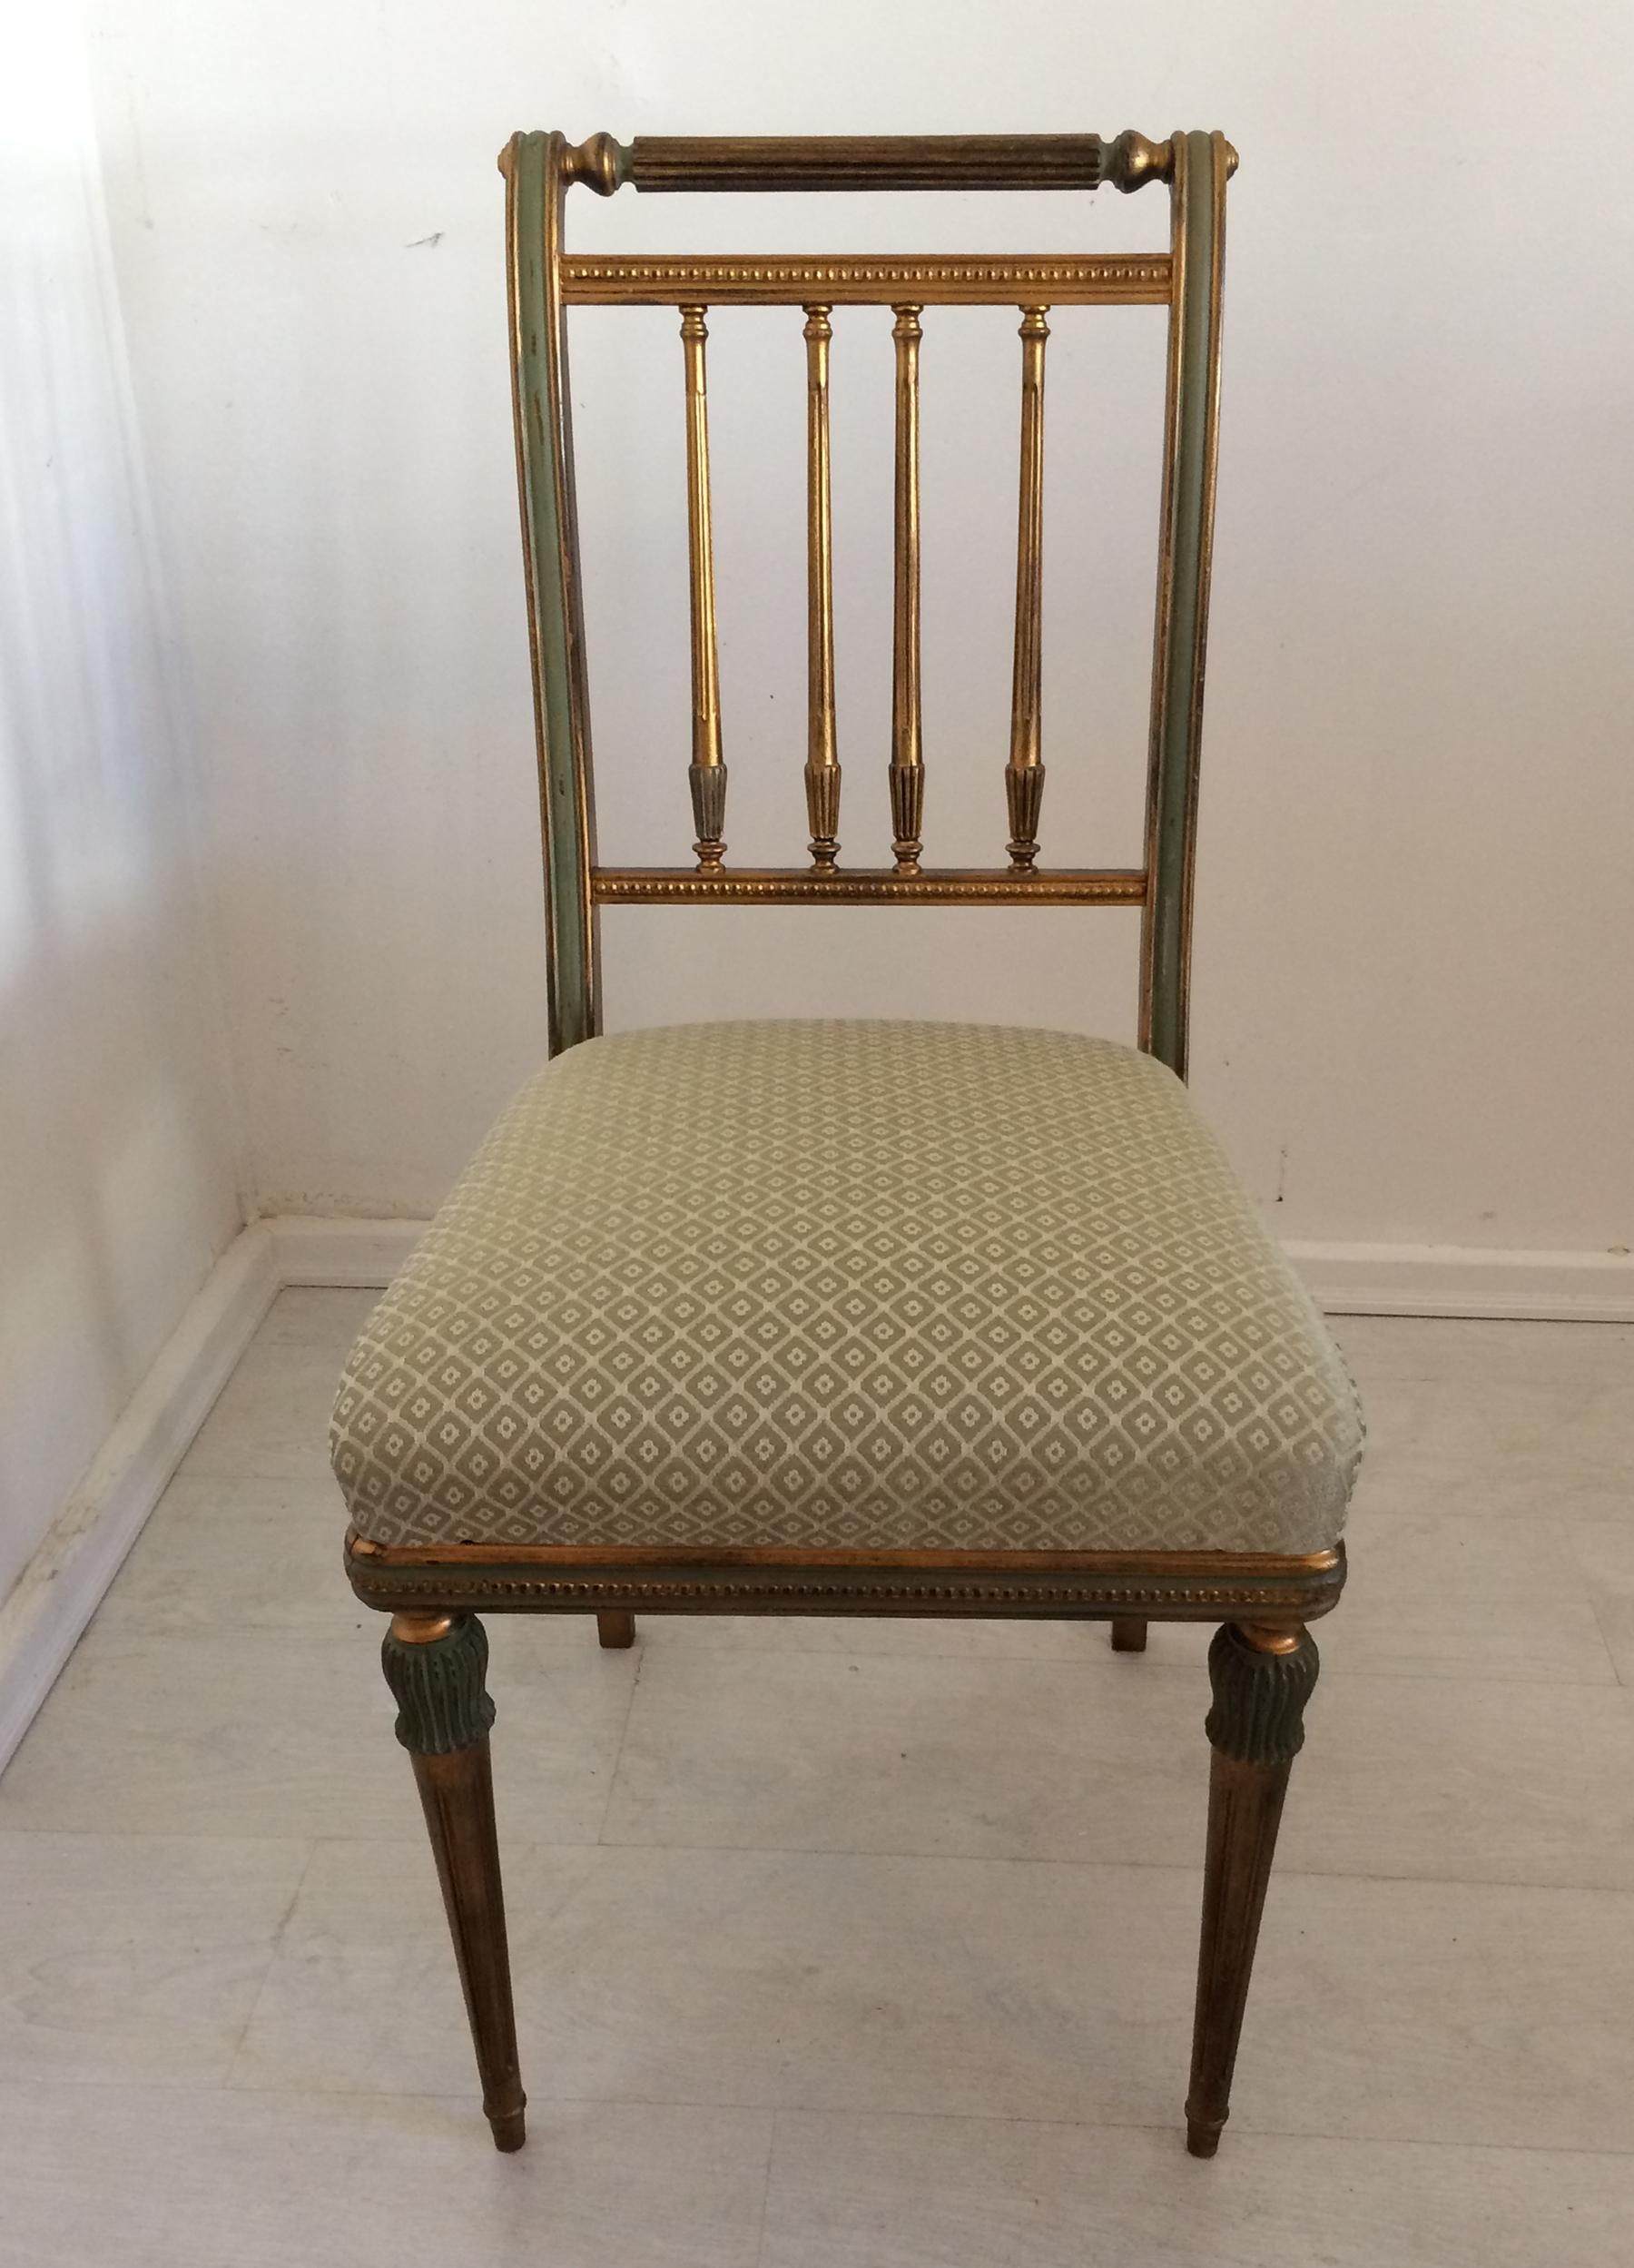 Green with gold highlights painted finish which appears to be the original finish. Fabric is in very good usable condition. Nice clean set of chairs ready to be used. 36 inches high by 18.5 deep by 18 wide seat height is 19.5 inches.
 